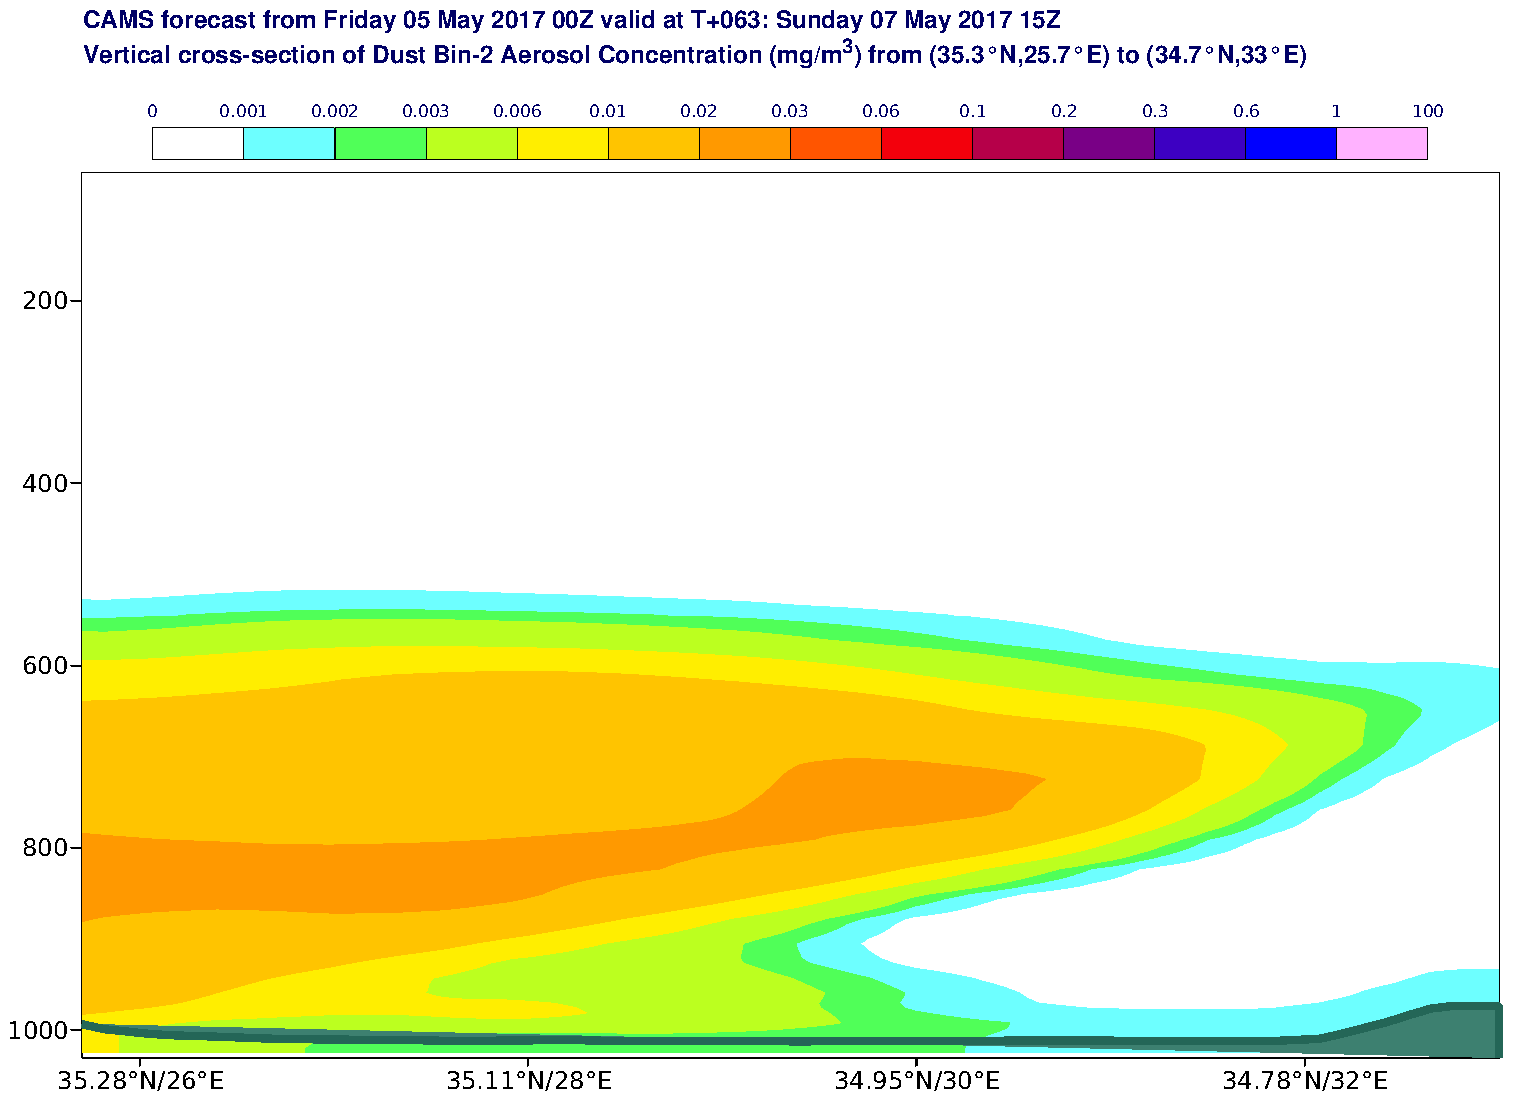 Vertical cross-section of Dust Bin-2 Aerosol Concentration (mg/m3) valid at T63 - 2017-05-07 15:00